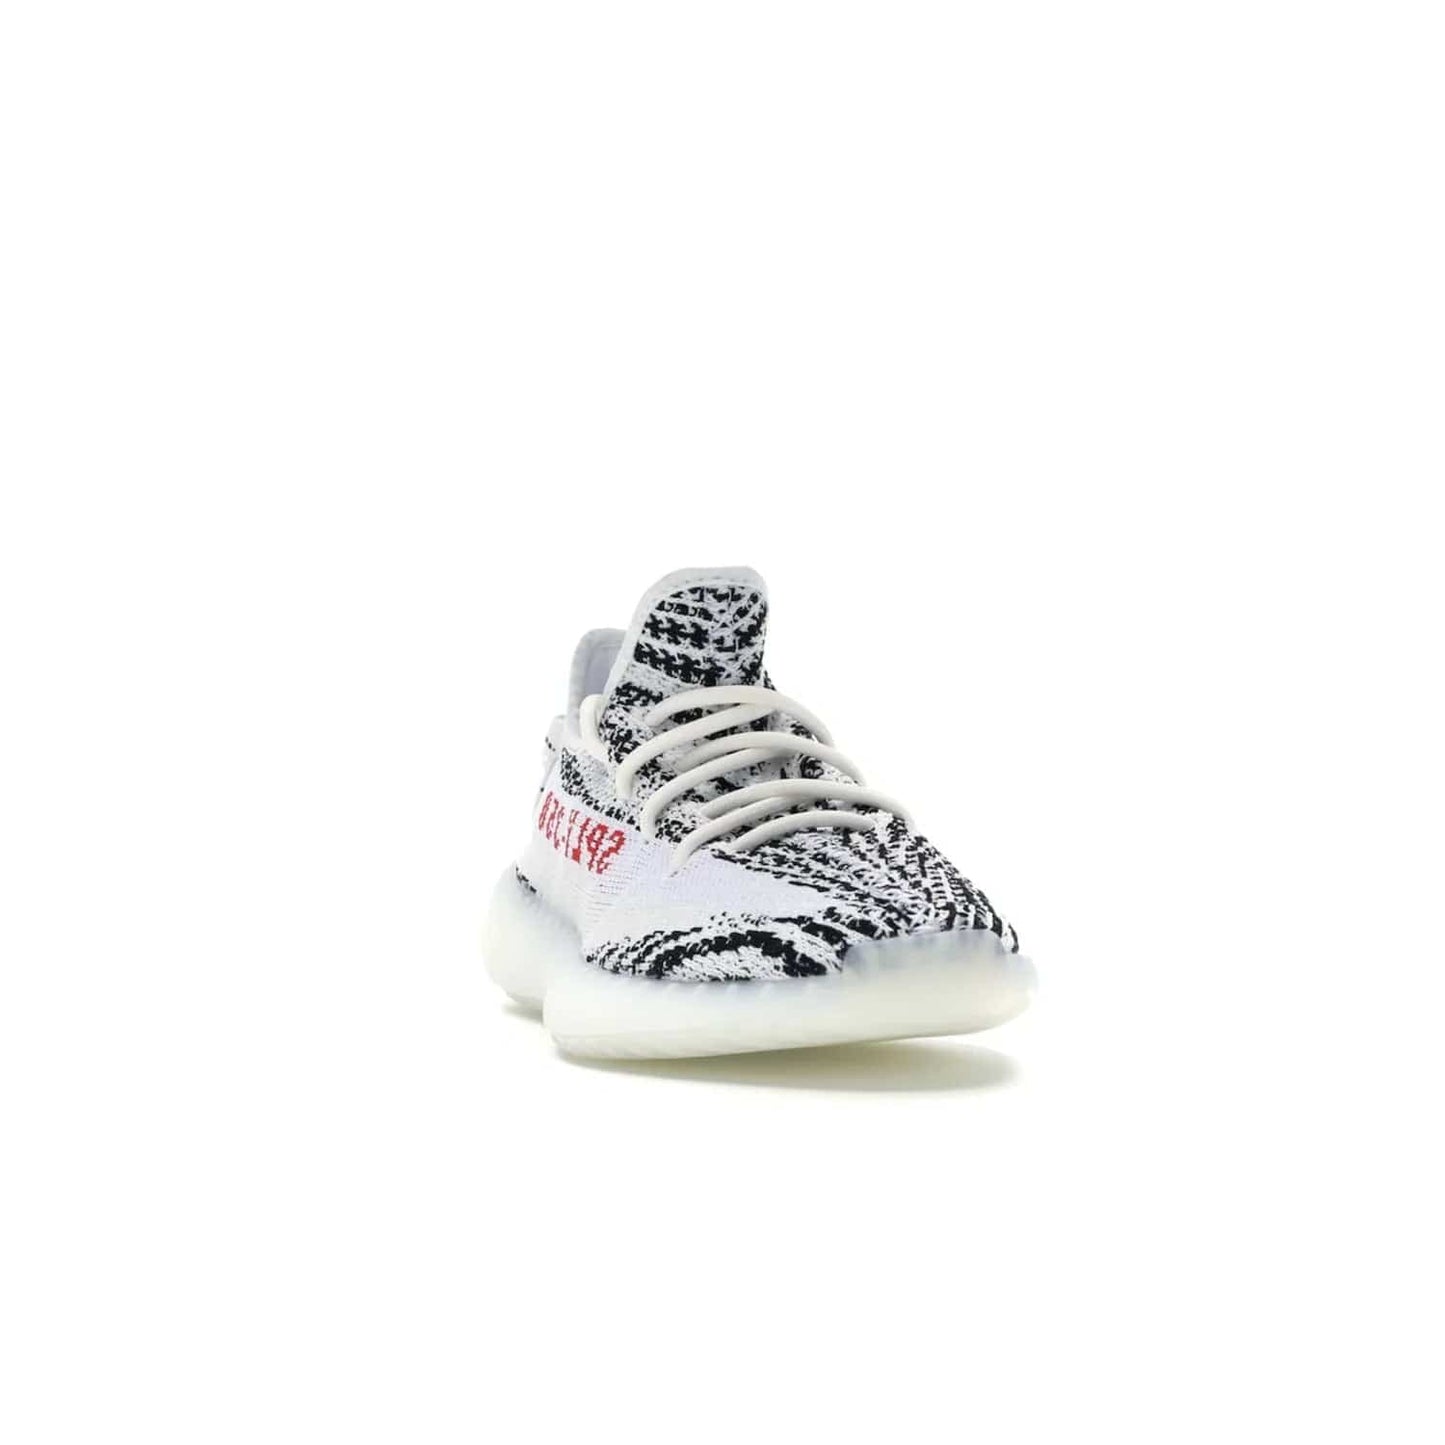 adidas Yeezy Boost 350 V2 Zebra - Image 8 - Only at www.BallersClubKickz.com - #
Score the iconic adidas Yeezy Boost 350 V2 Zebra for a fashionable addition to your street-style. Featuring a Primeknit upper and Boost sole, you'll look great and feel comfortable with every step.